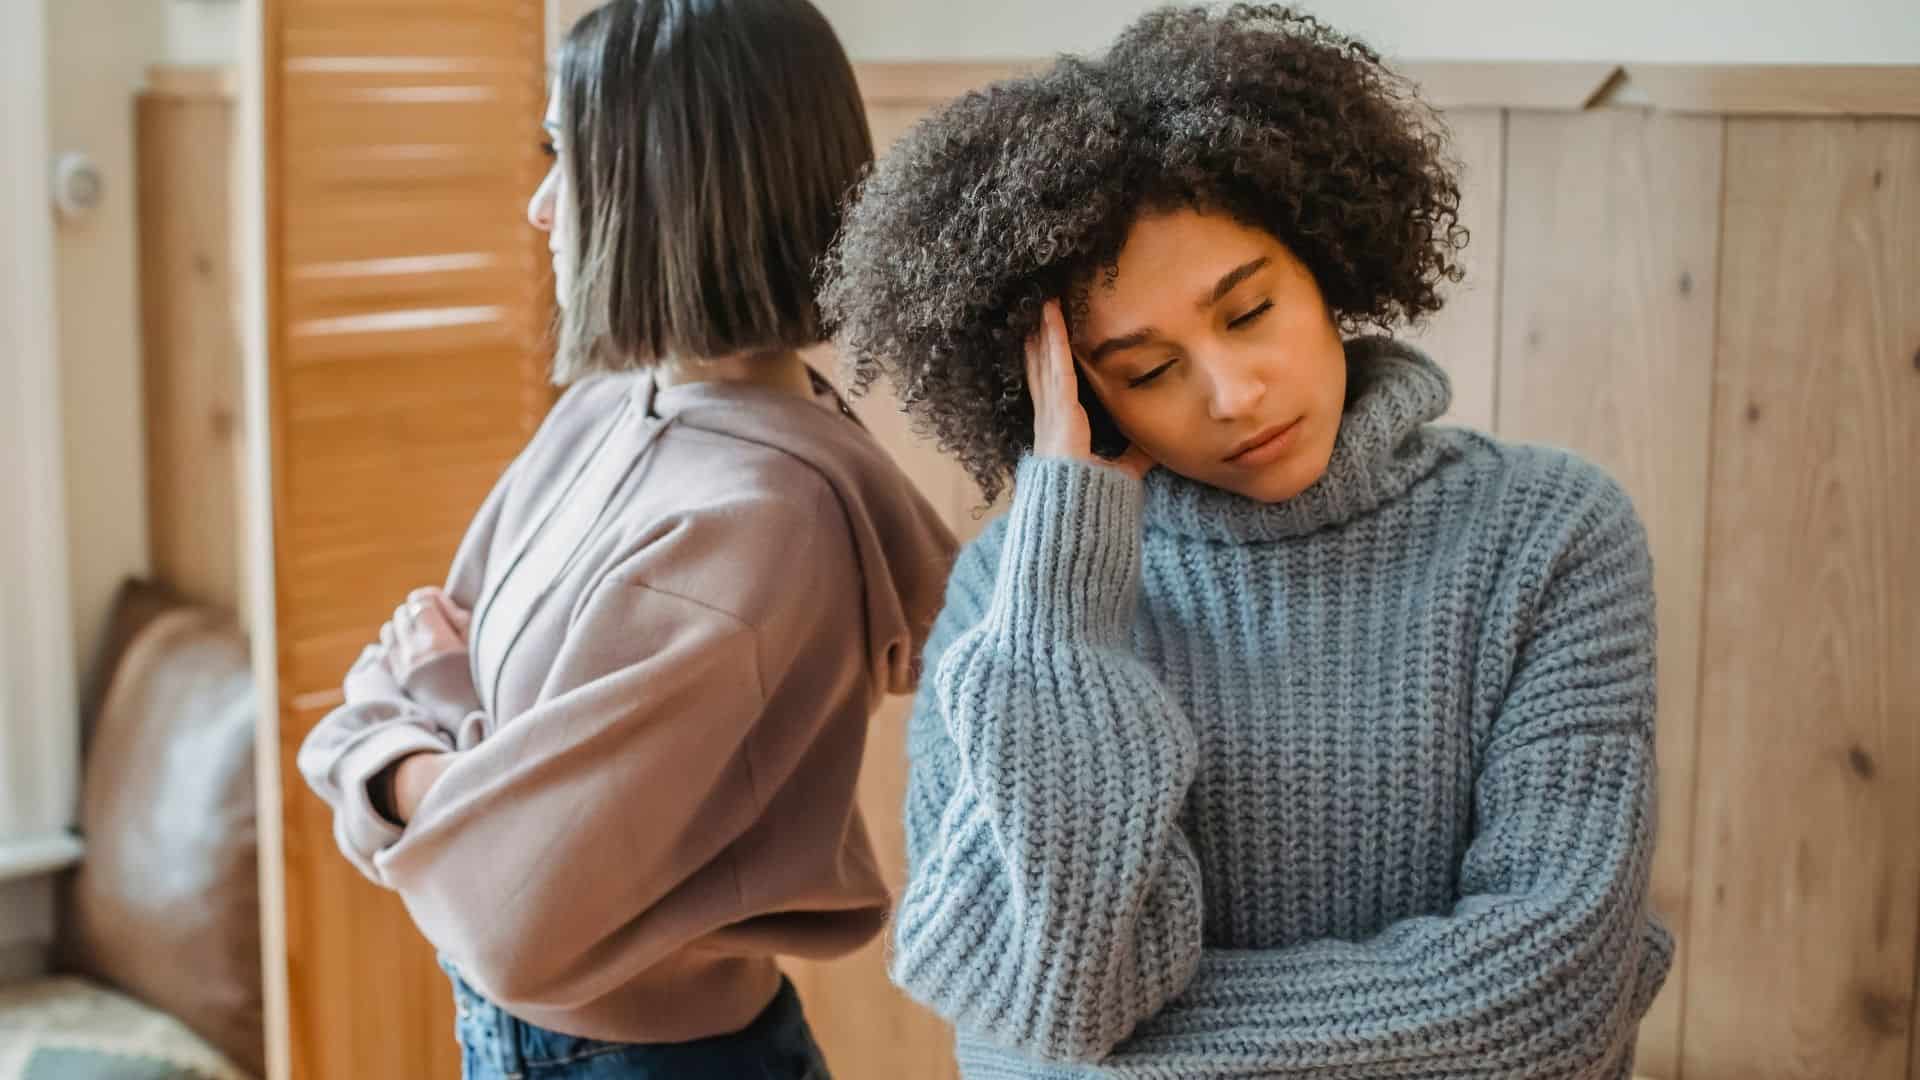 Two young women looking frustrated